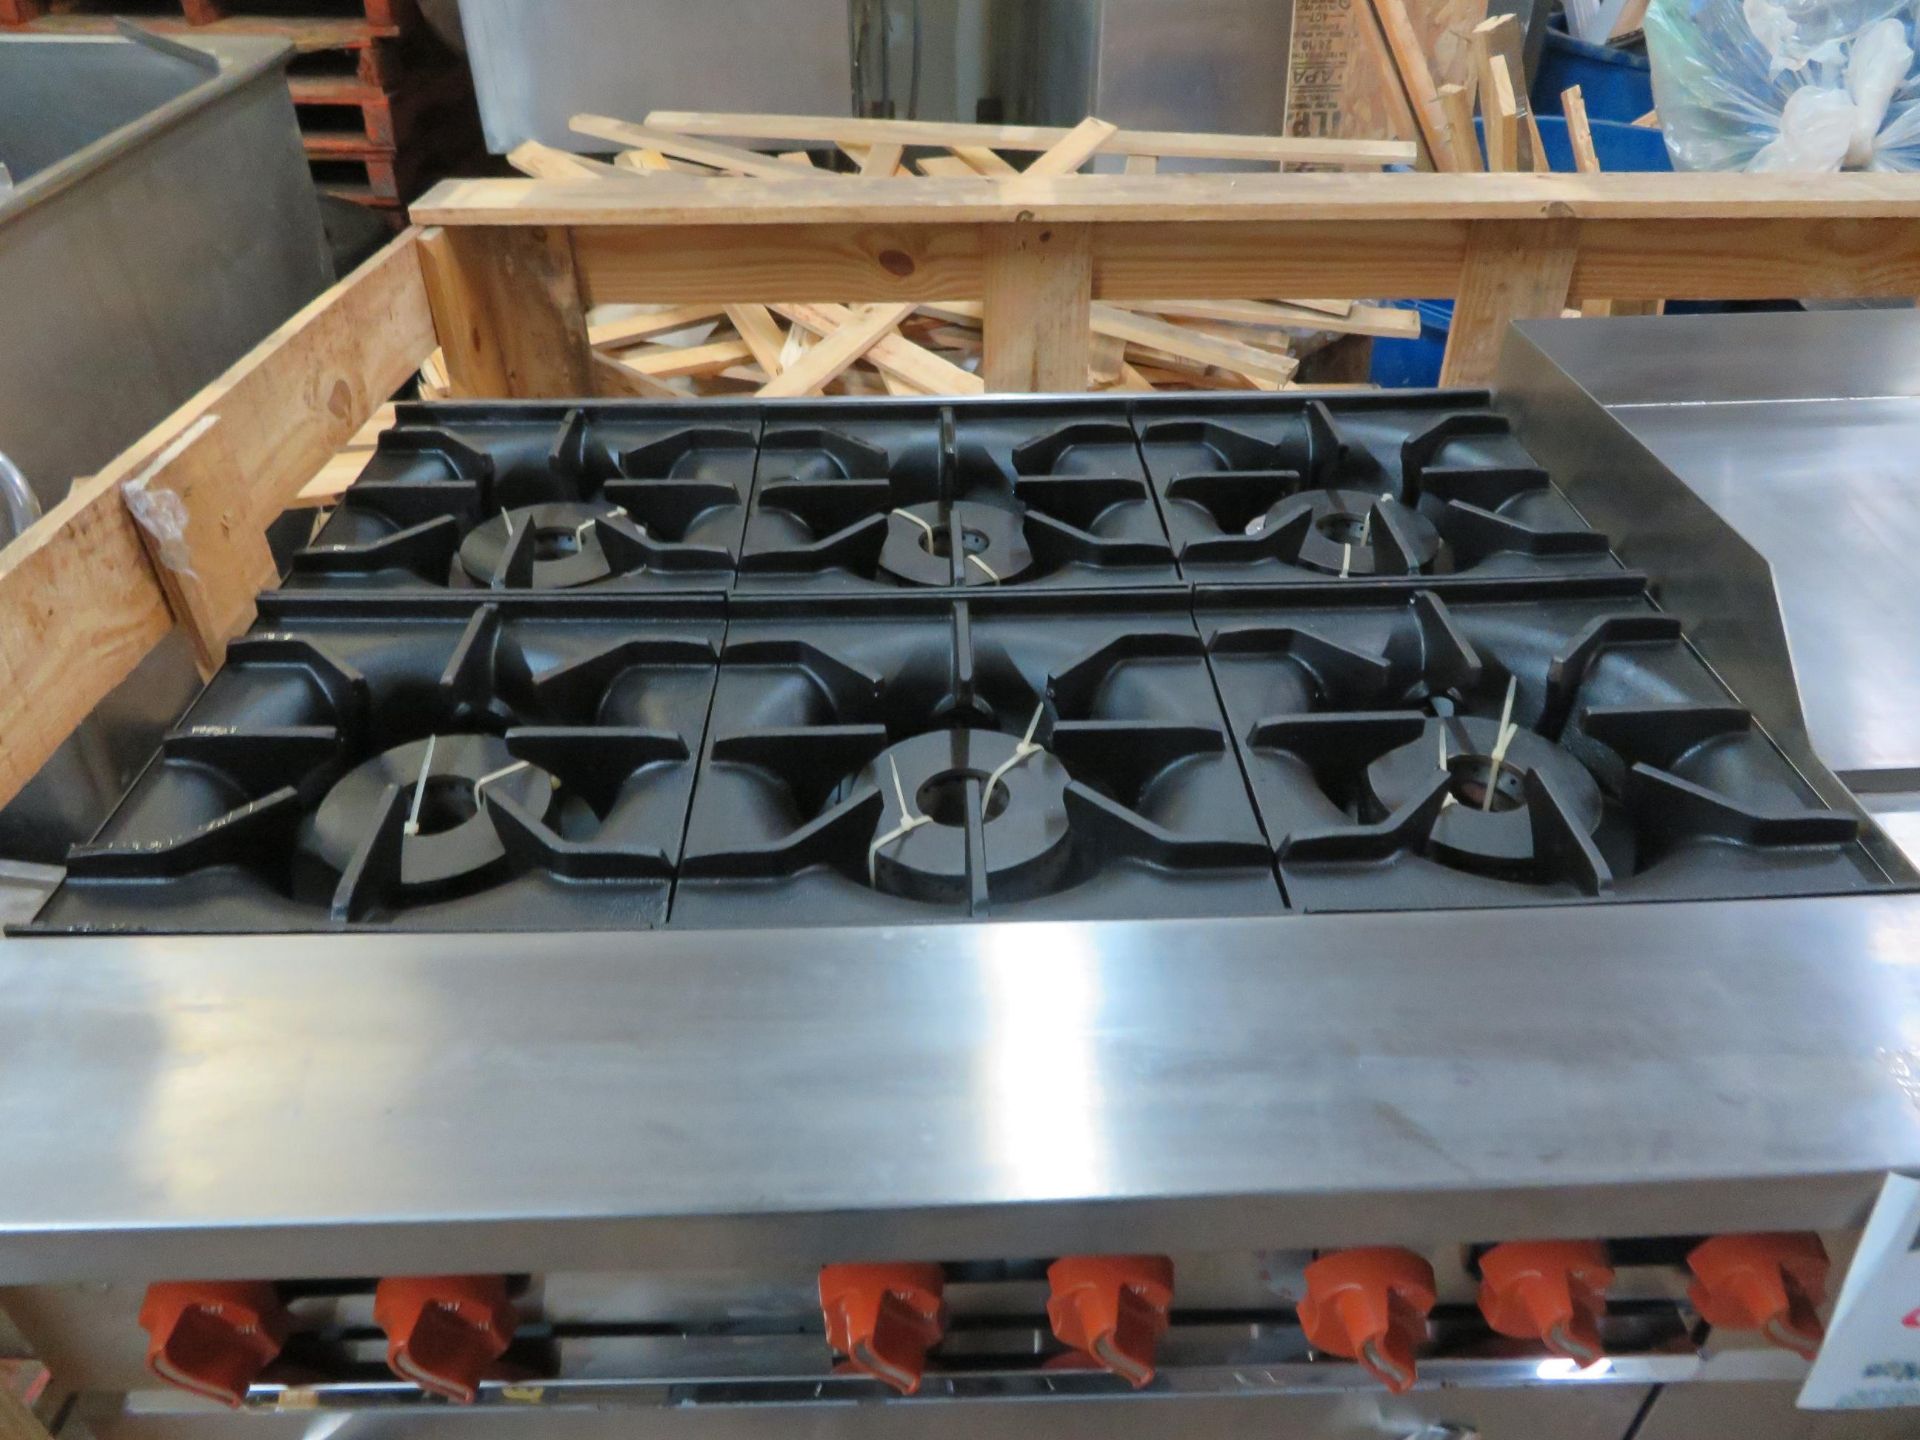 Brand New SIERRA combination gas 60"range with 6 burners and 24" hot plate/griddle, Mod #SR-6B-24G- - Image 2 of 5